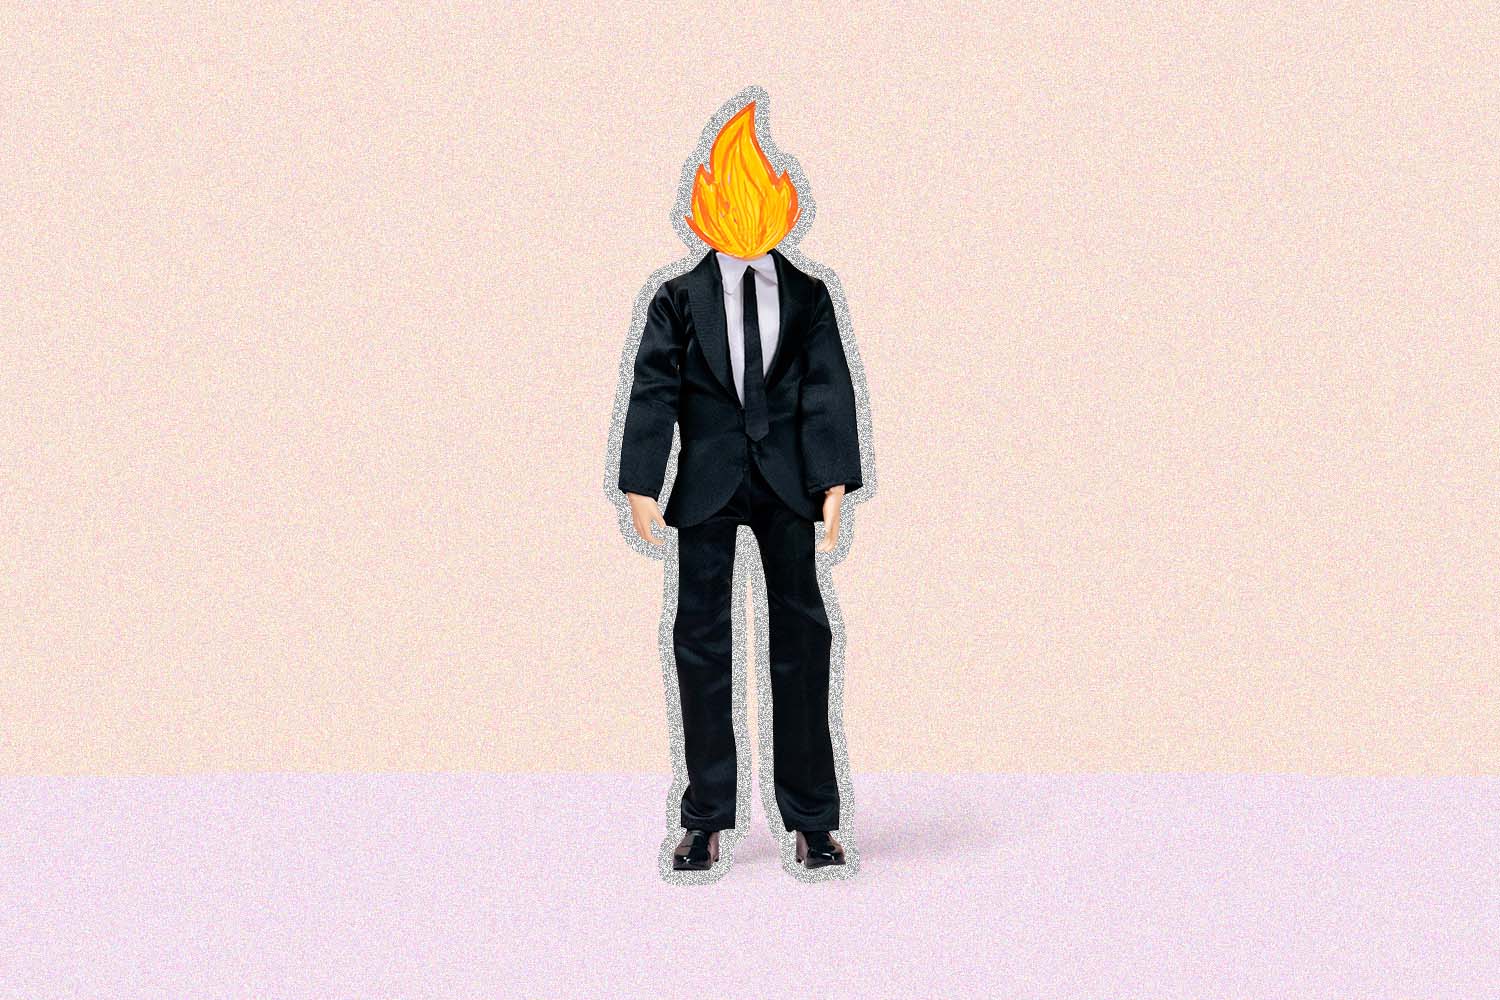 Person with flames instead of a head